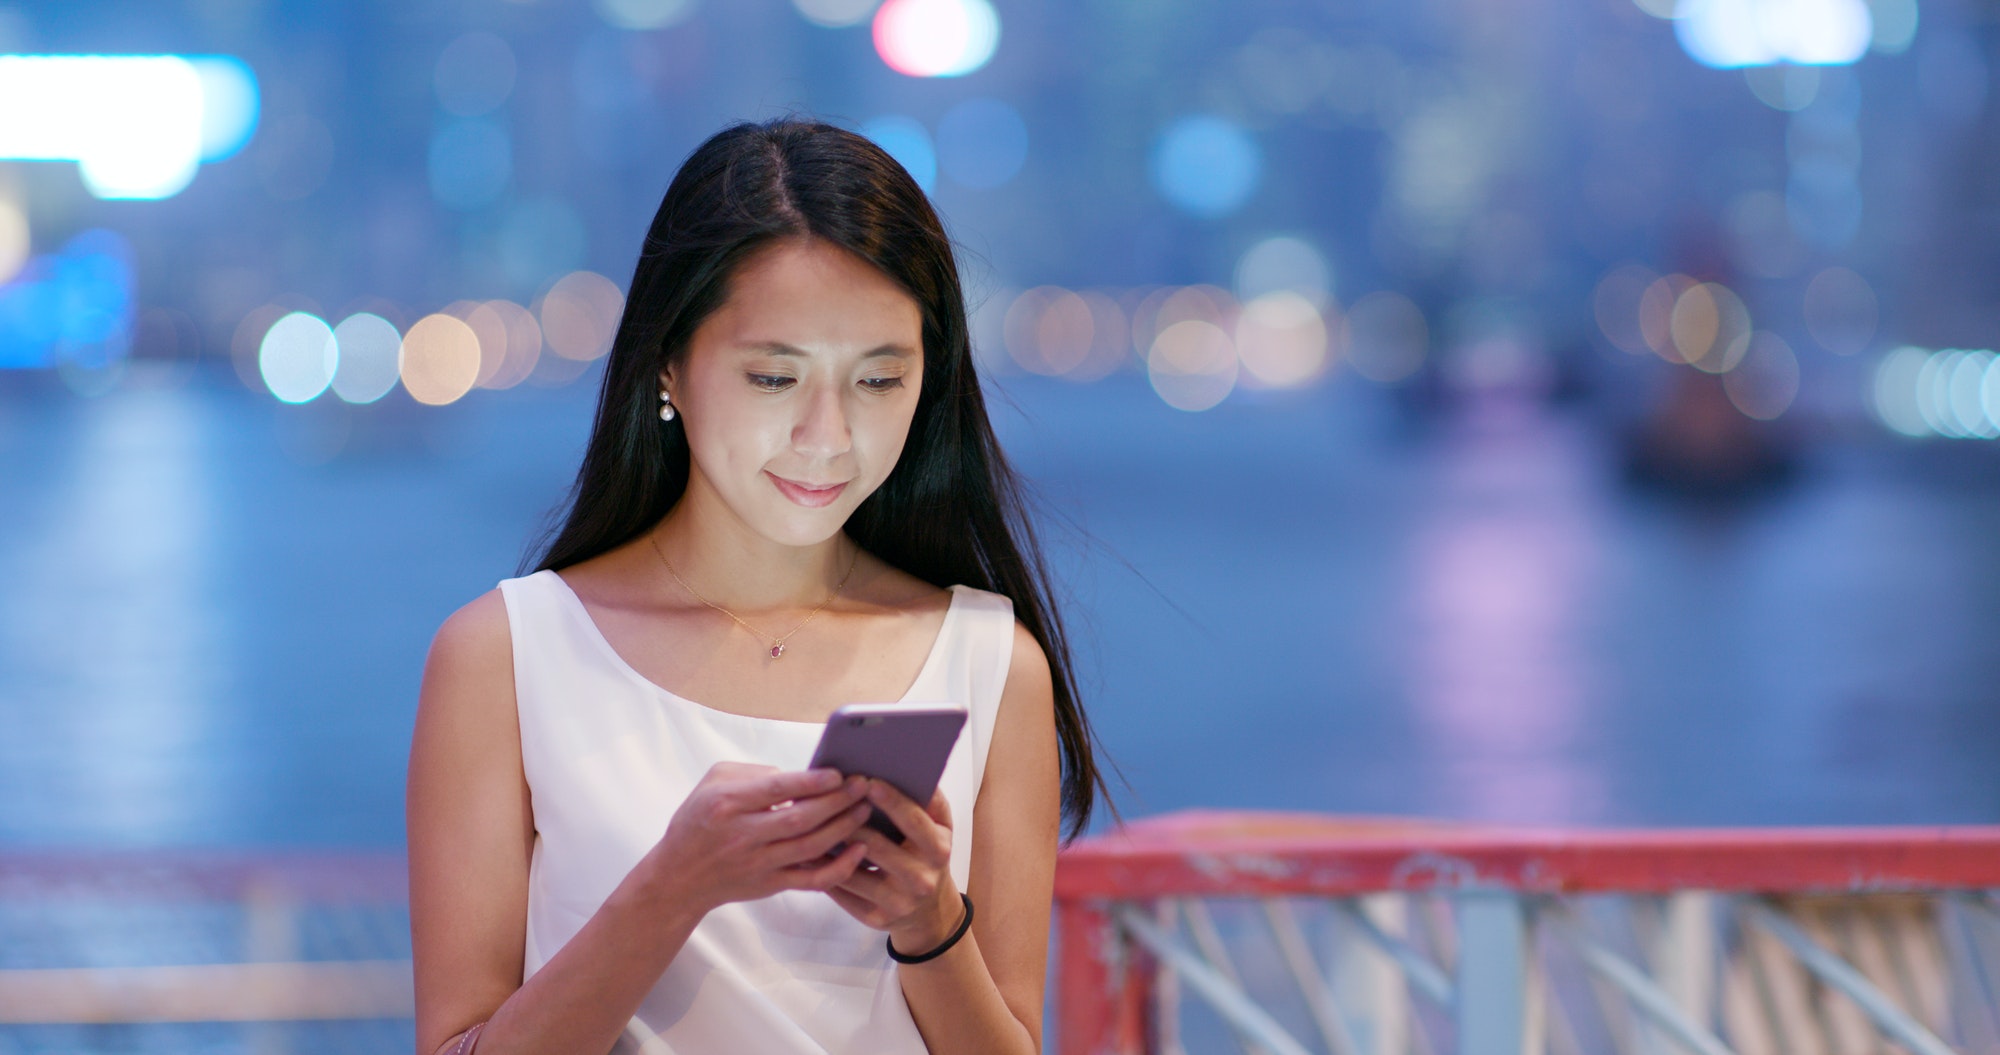 woman-use-of-mobile-phone-online-at-night-jpg